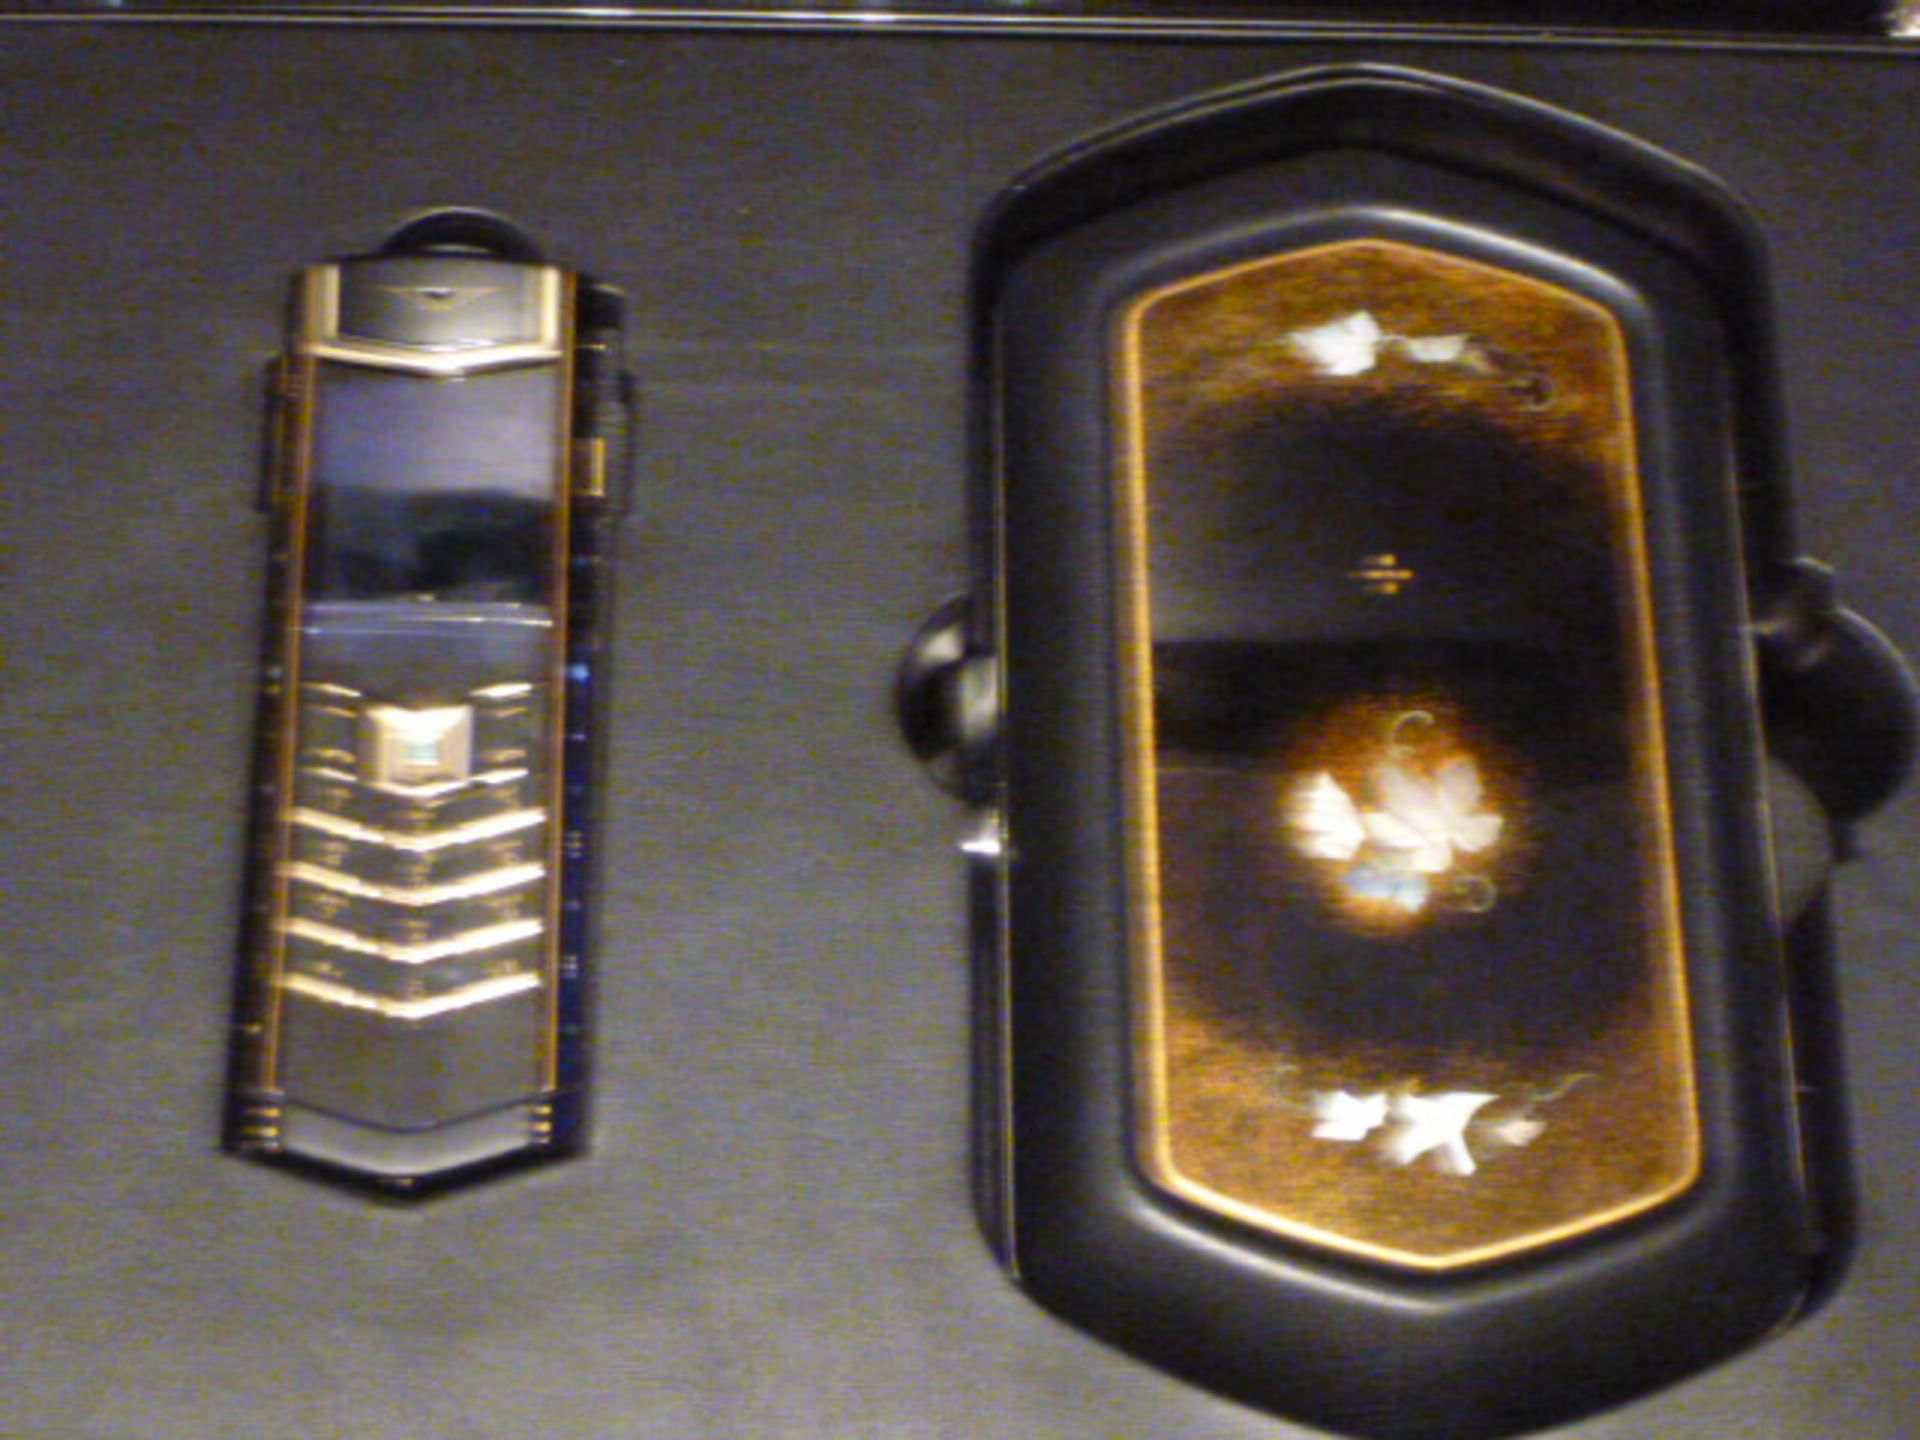 Vertu Signature Harmony Phone, Unique Design 4 of 4. This Handset has been Designed and Created - Image 2 of 8